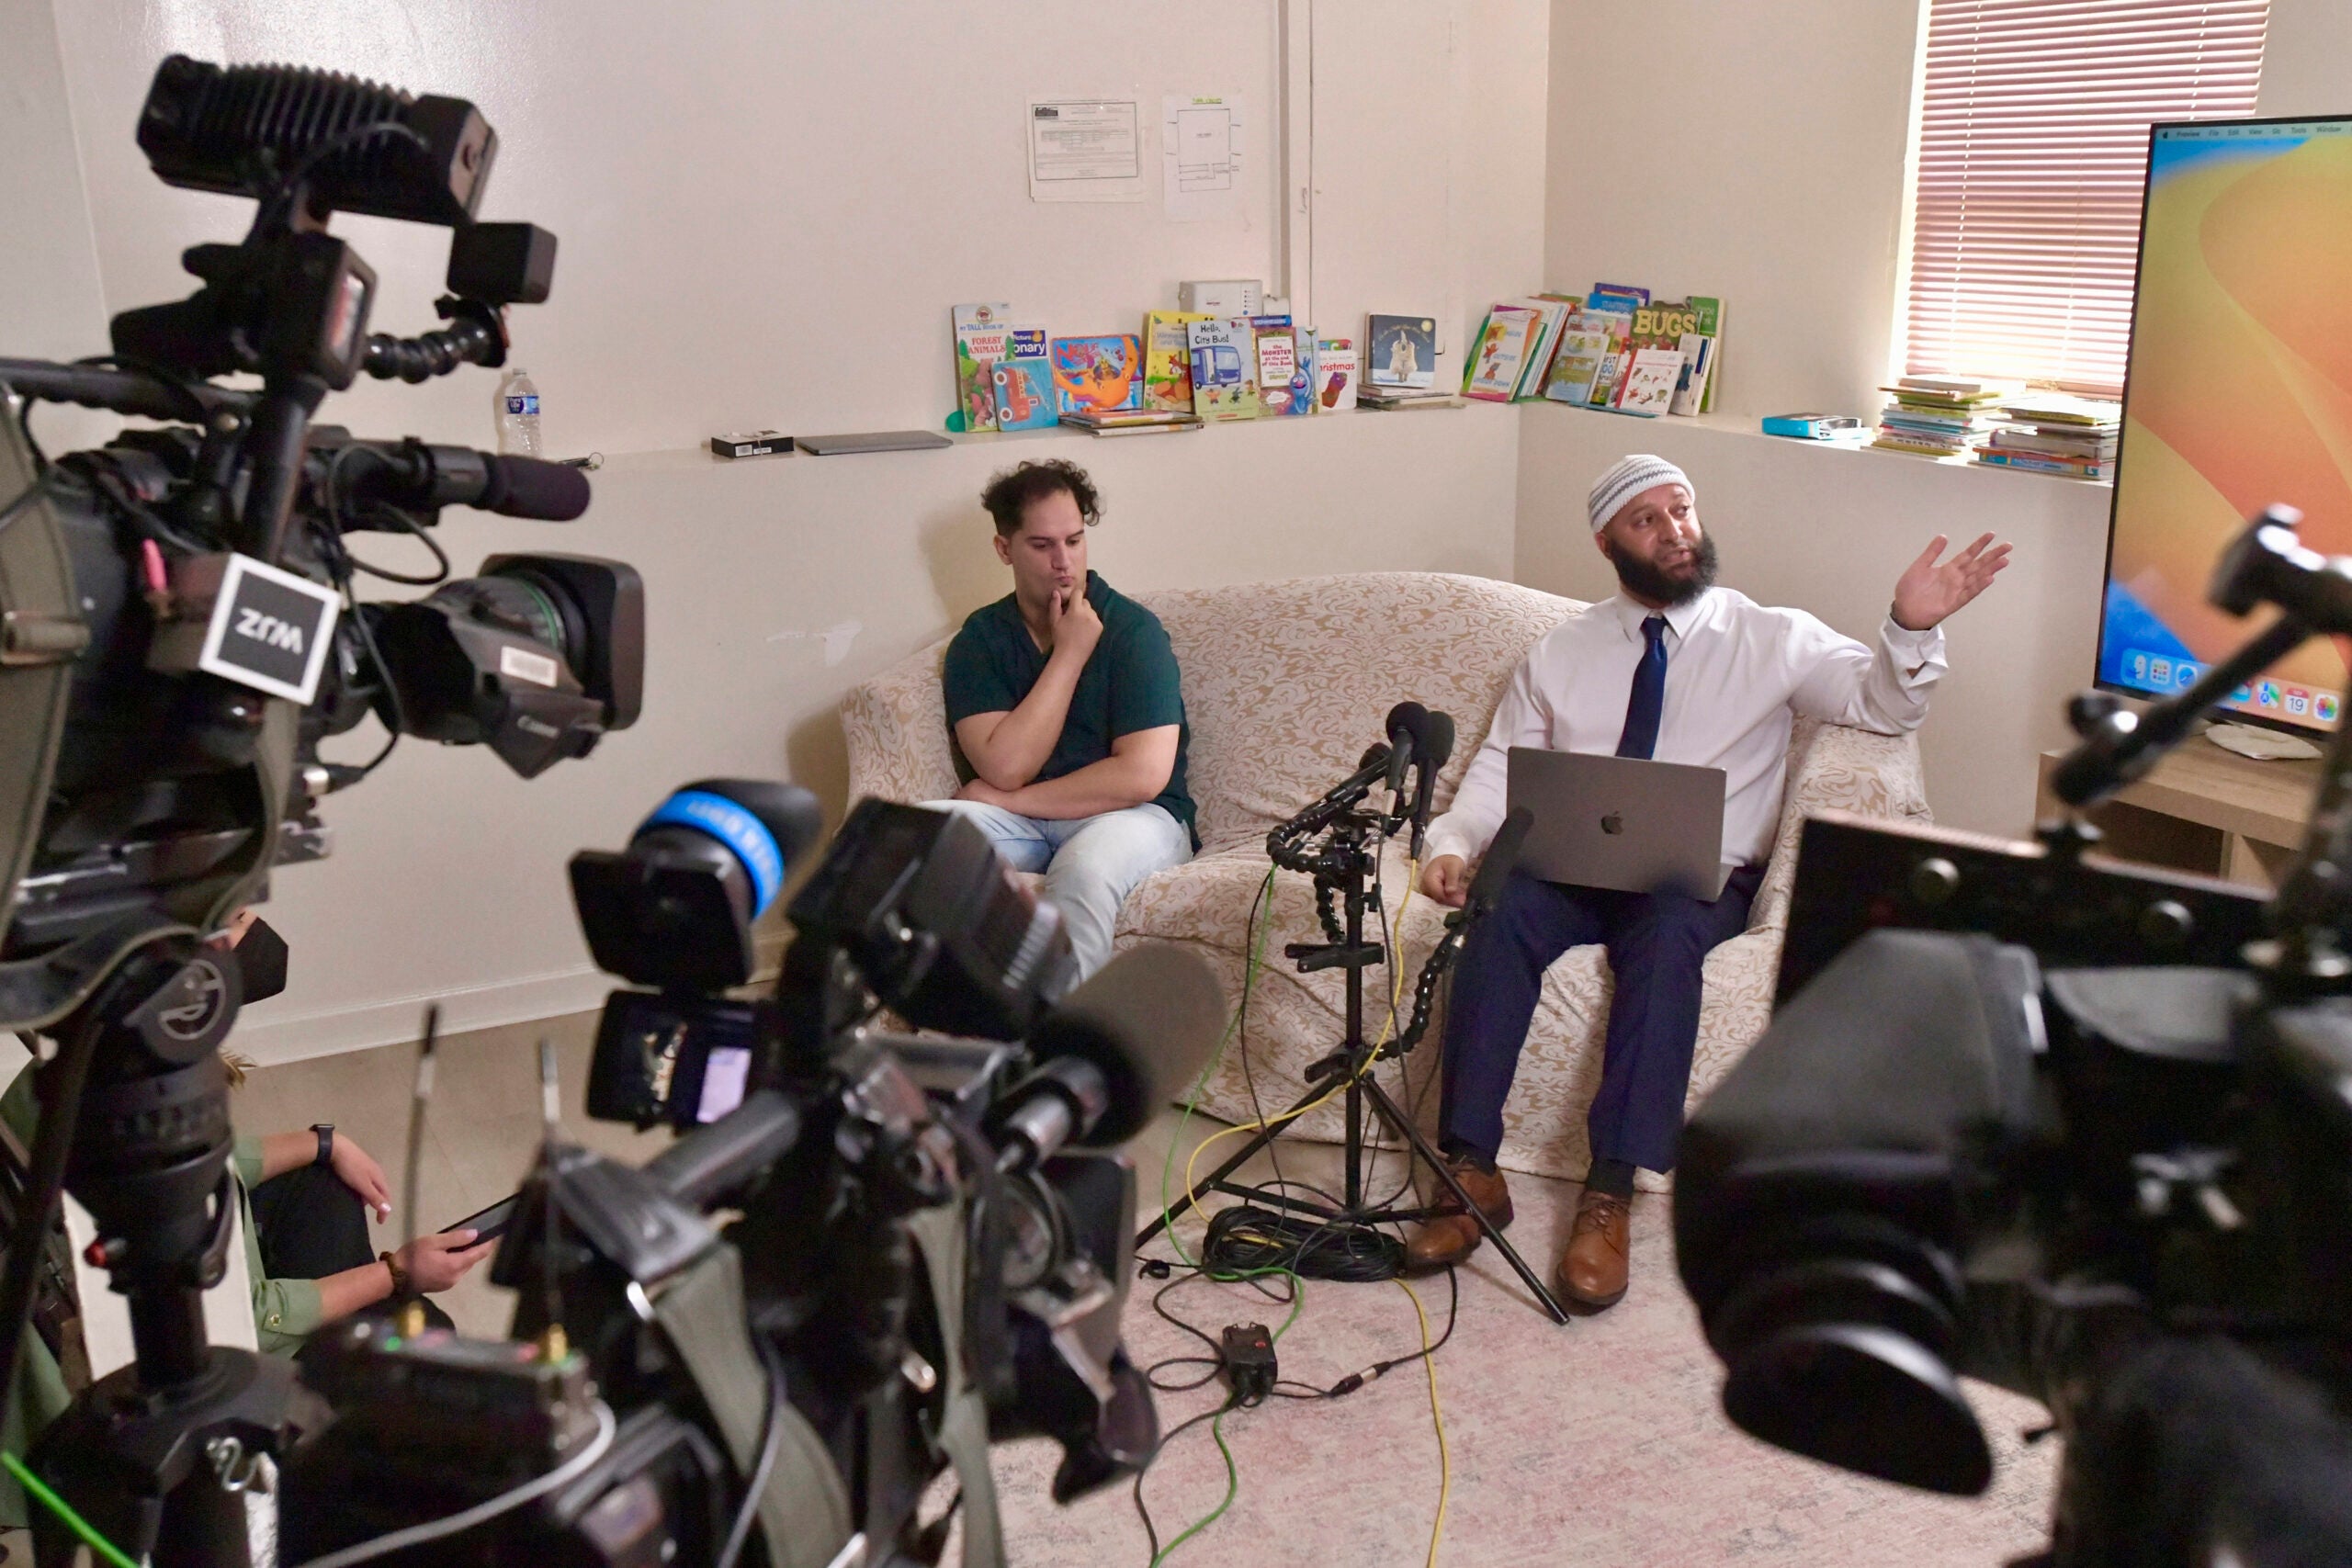 Adnan Syed presents evidence of alleged prosecutorial misconduct during a media conference at his family's home as his younger brother Yusuf Syed listens.